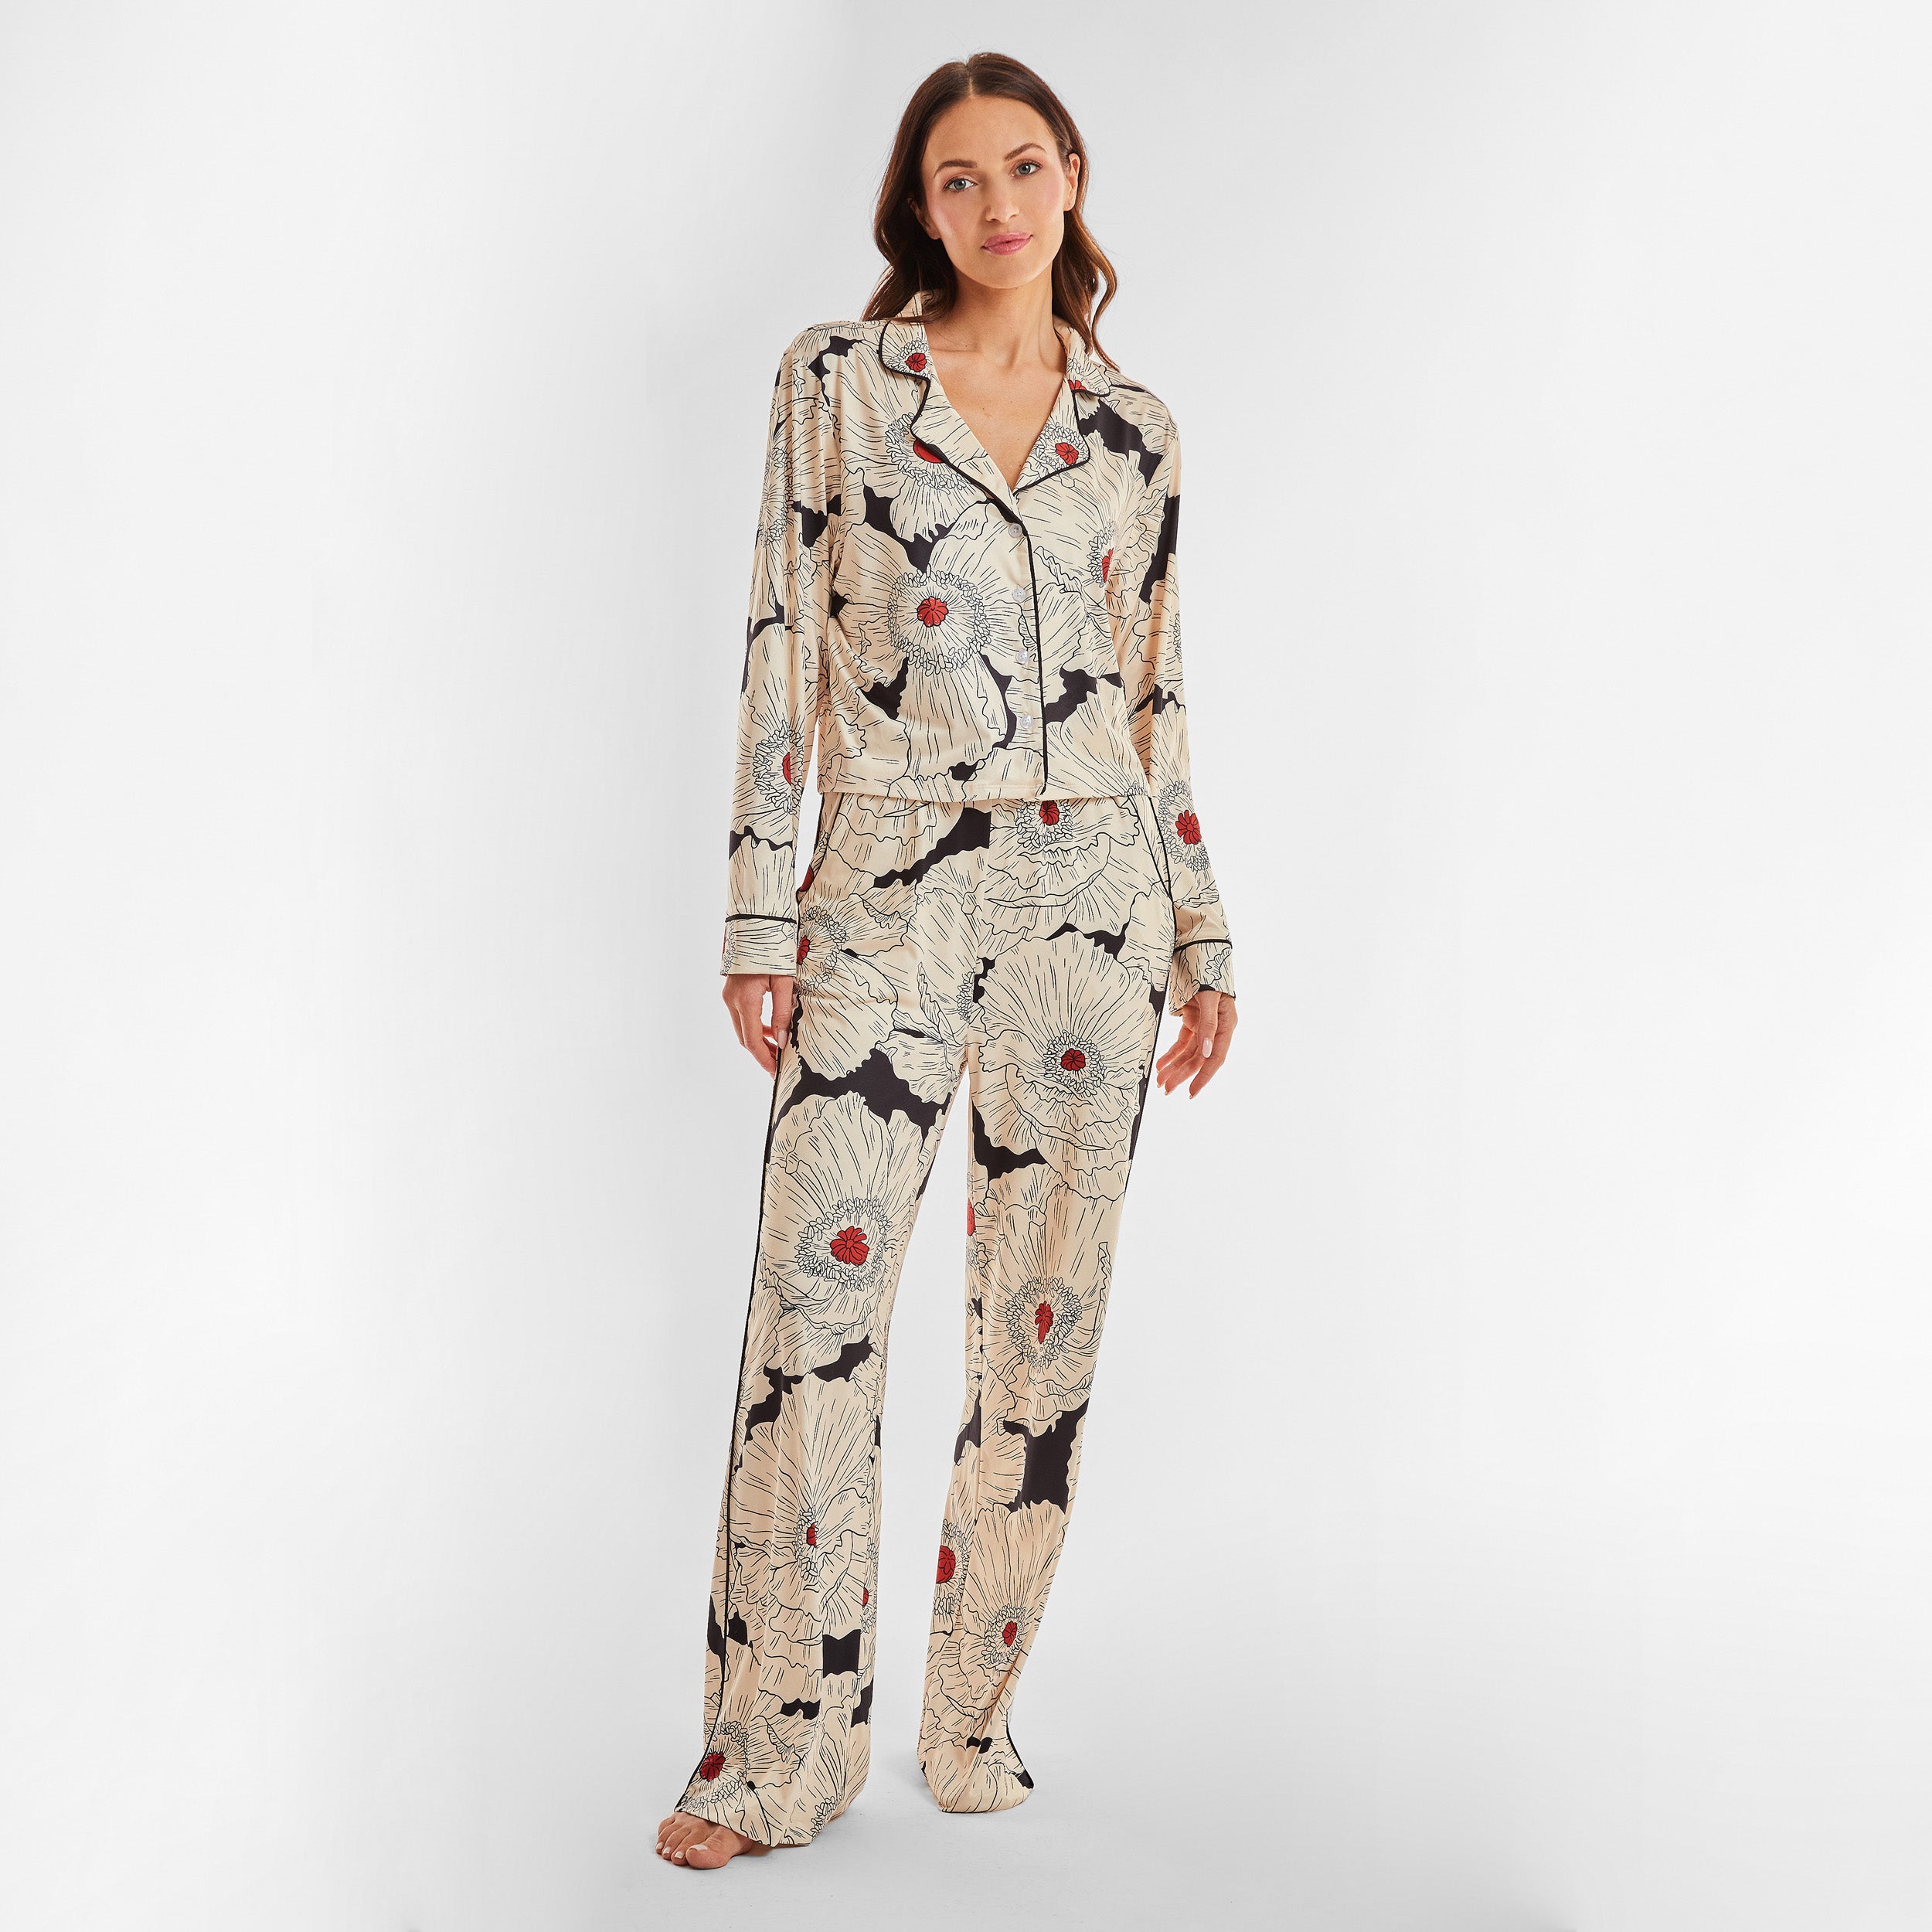 Full view of woman wearing breathable, relaxed and buttery smooth pajama pant featuring high-waist cut, side pockets, front tie and stunning Poppy floral print.